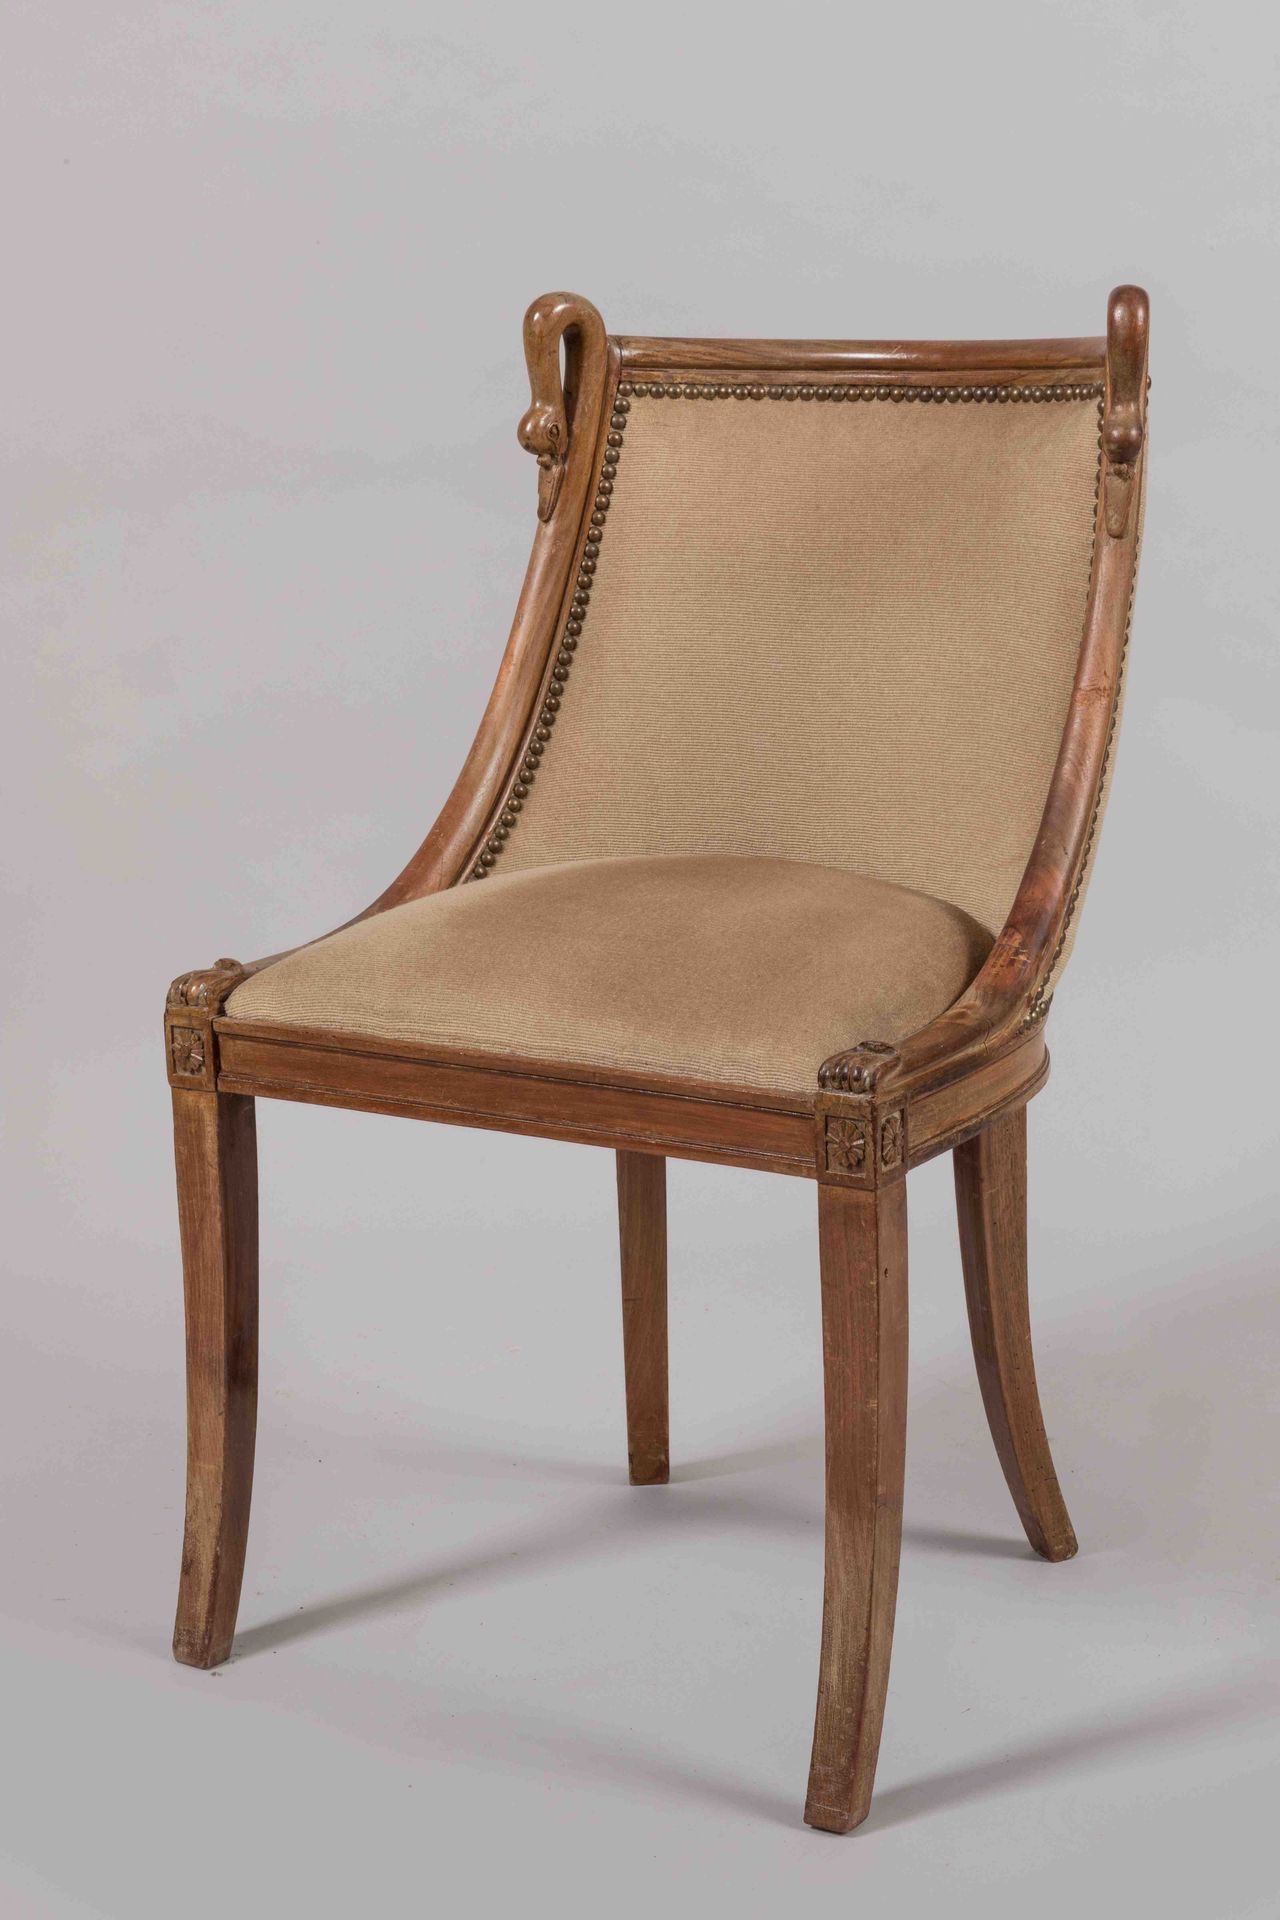 Null Gondola chair in moulded and carved swan neck, resting on four sabre feet.
&hellip;